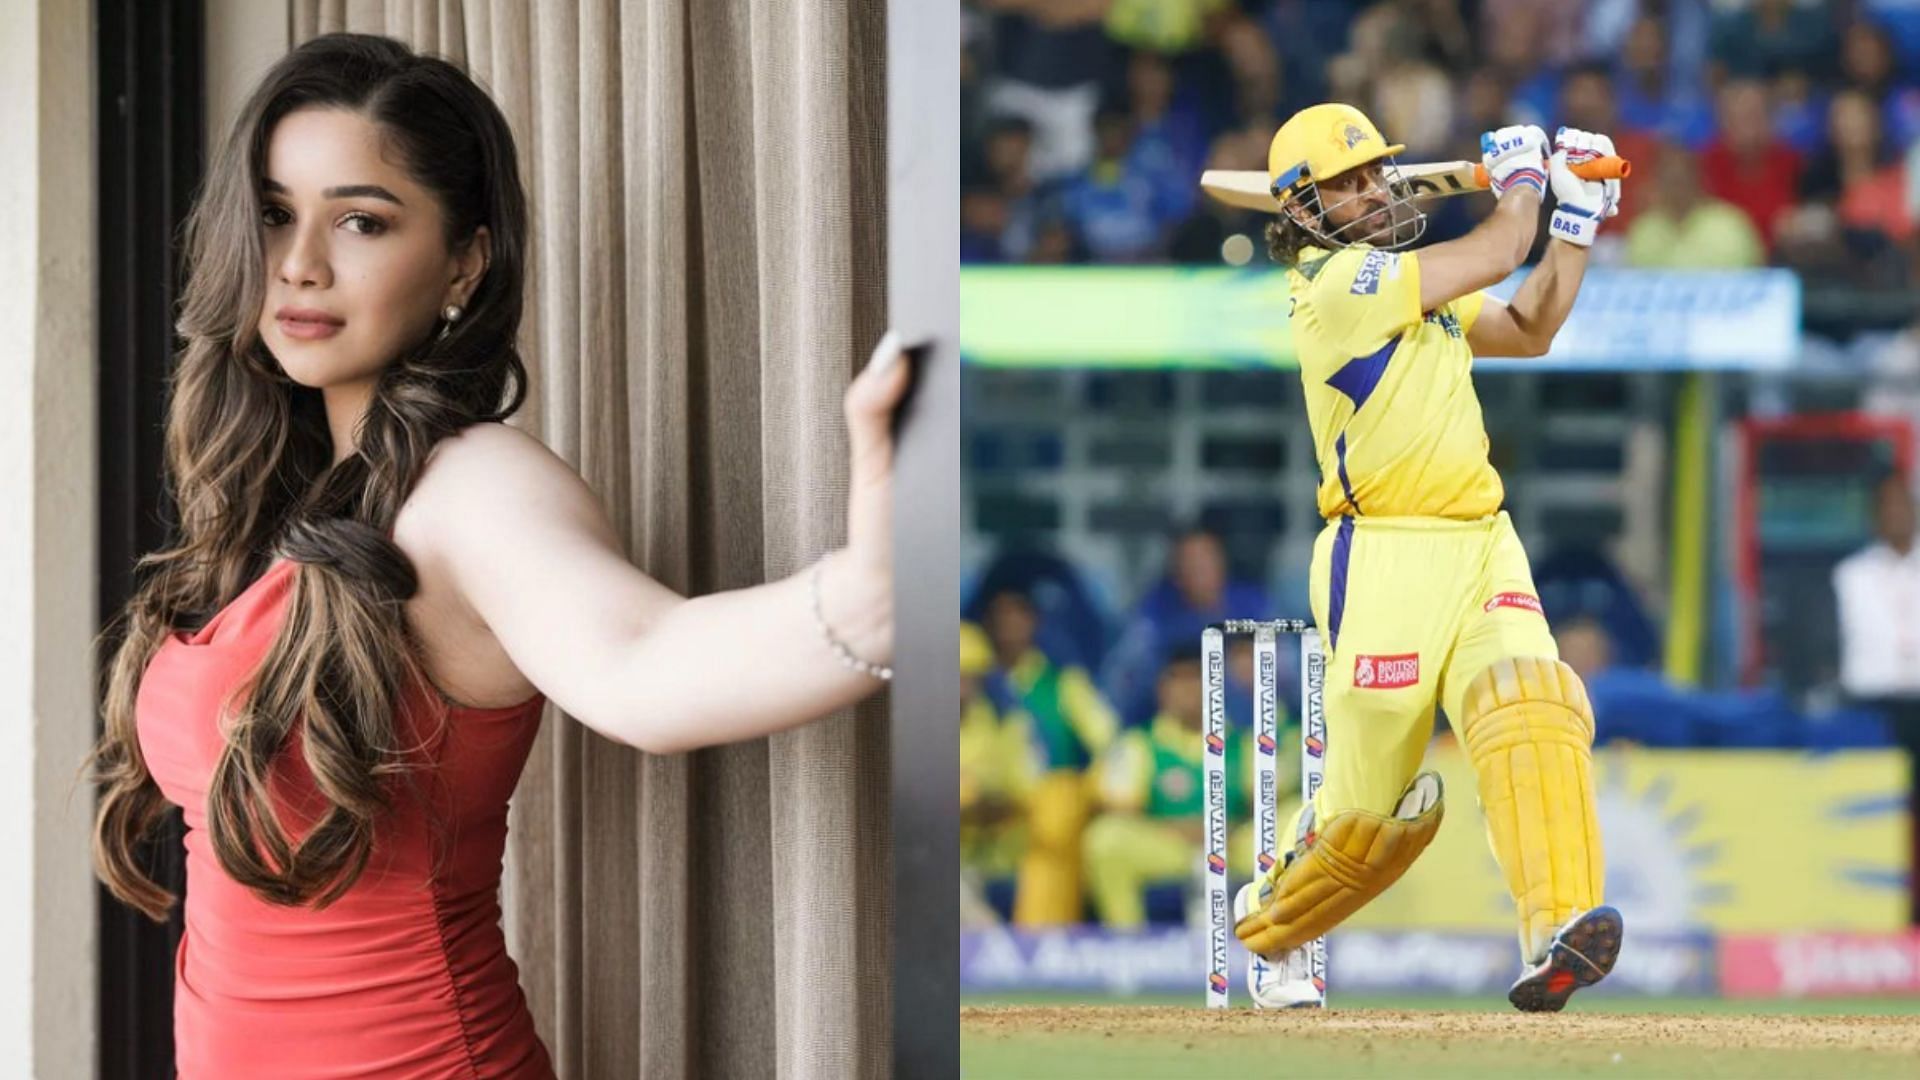 Sara Tendulkar was as stunned as everyone else in the stands seeing MS Dhoni flick the balls for sixes